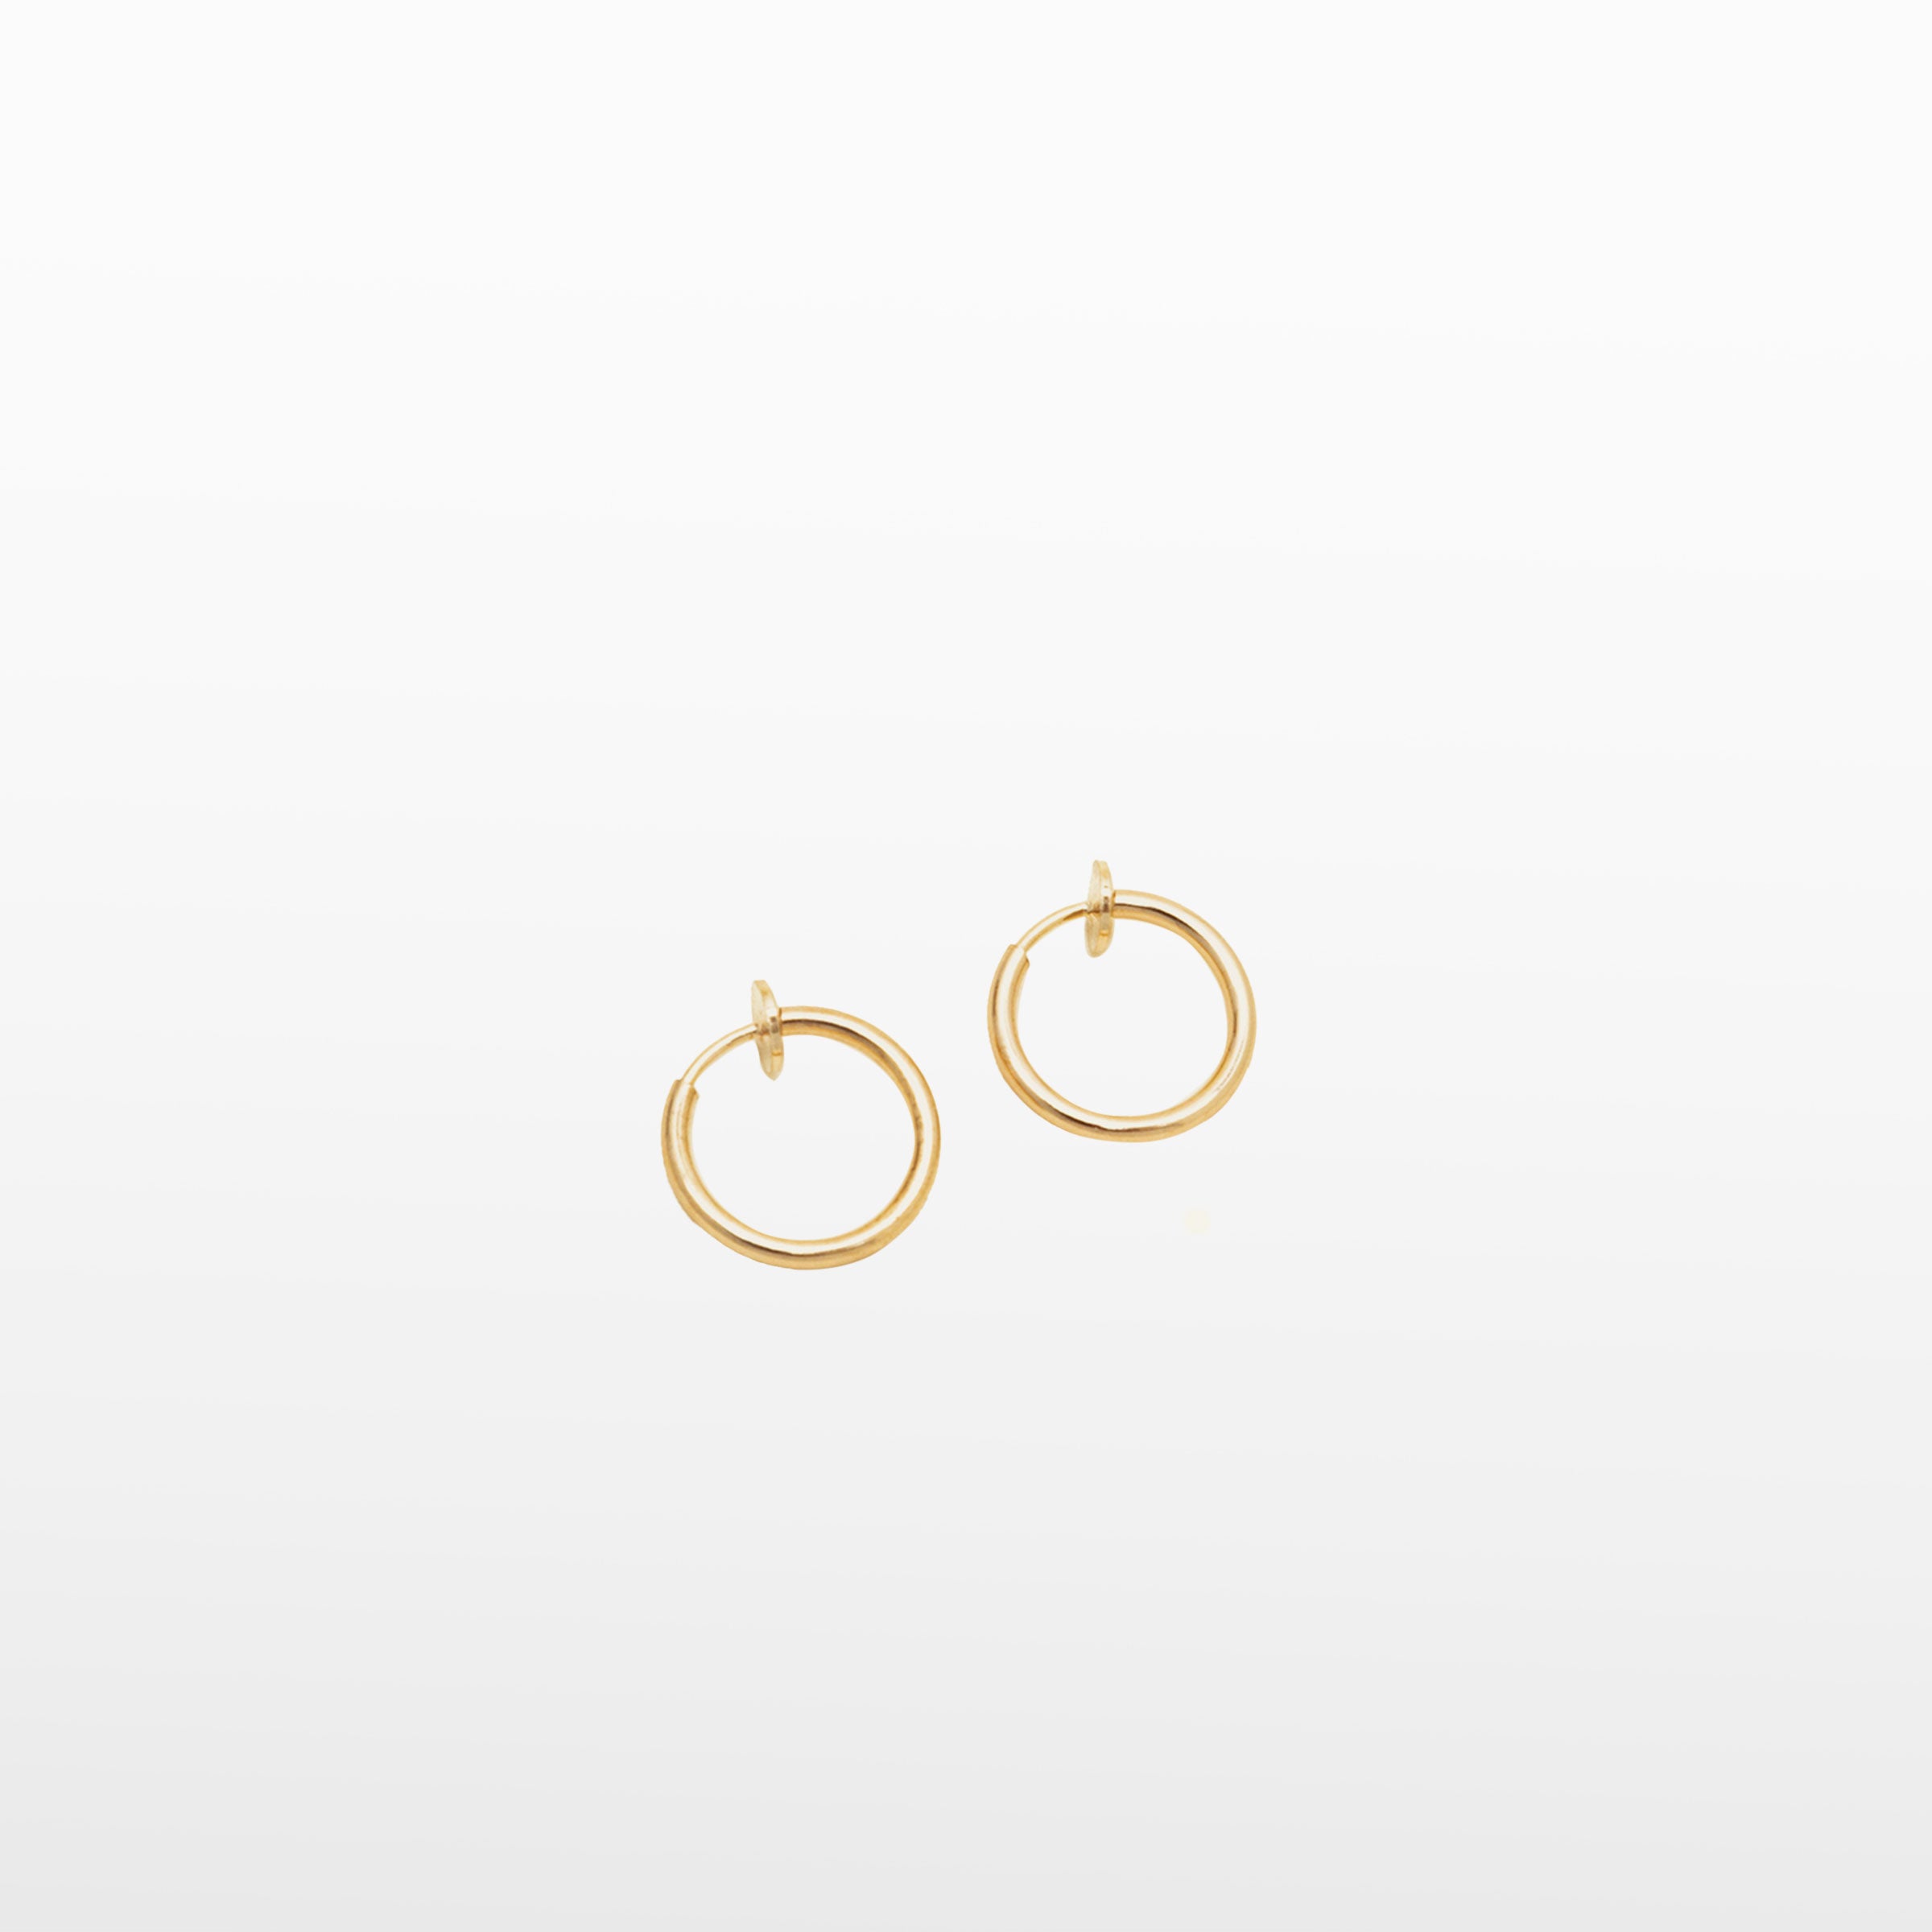 Image of the 18K Gold Plated Thin Hoop Clip On Earrings are ideal for those who have smaller, thinner ear lobes as the slide-spring closure makes them comfortable to wear for up to 4 hours. The earrings are highly secure and adjustable to fit any ear thickness. One pair is included.